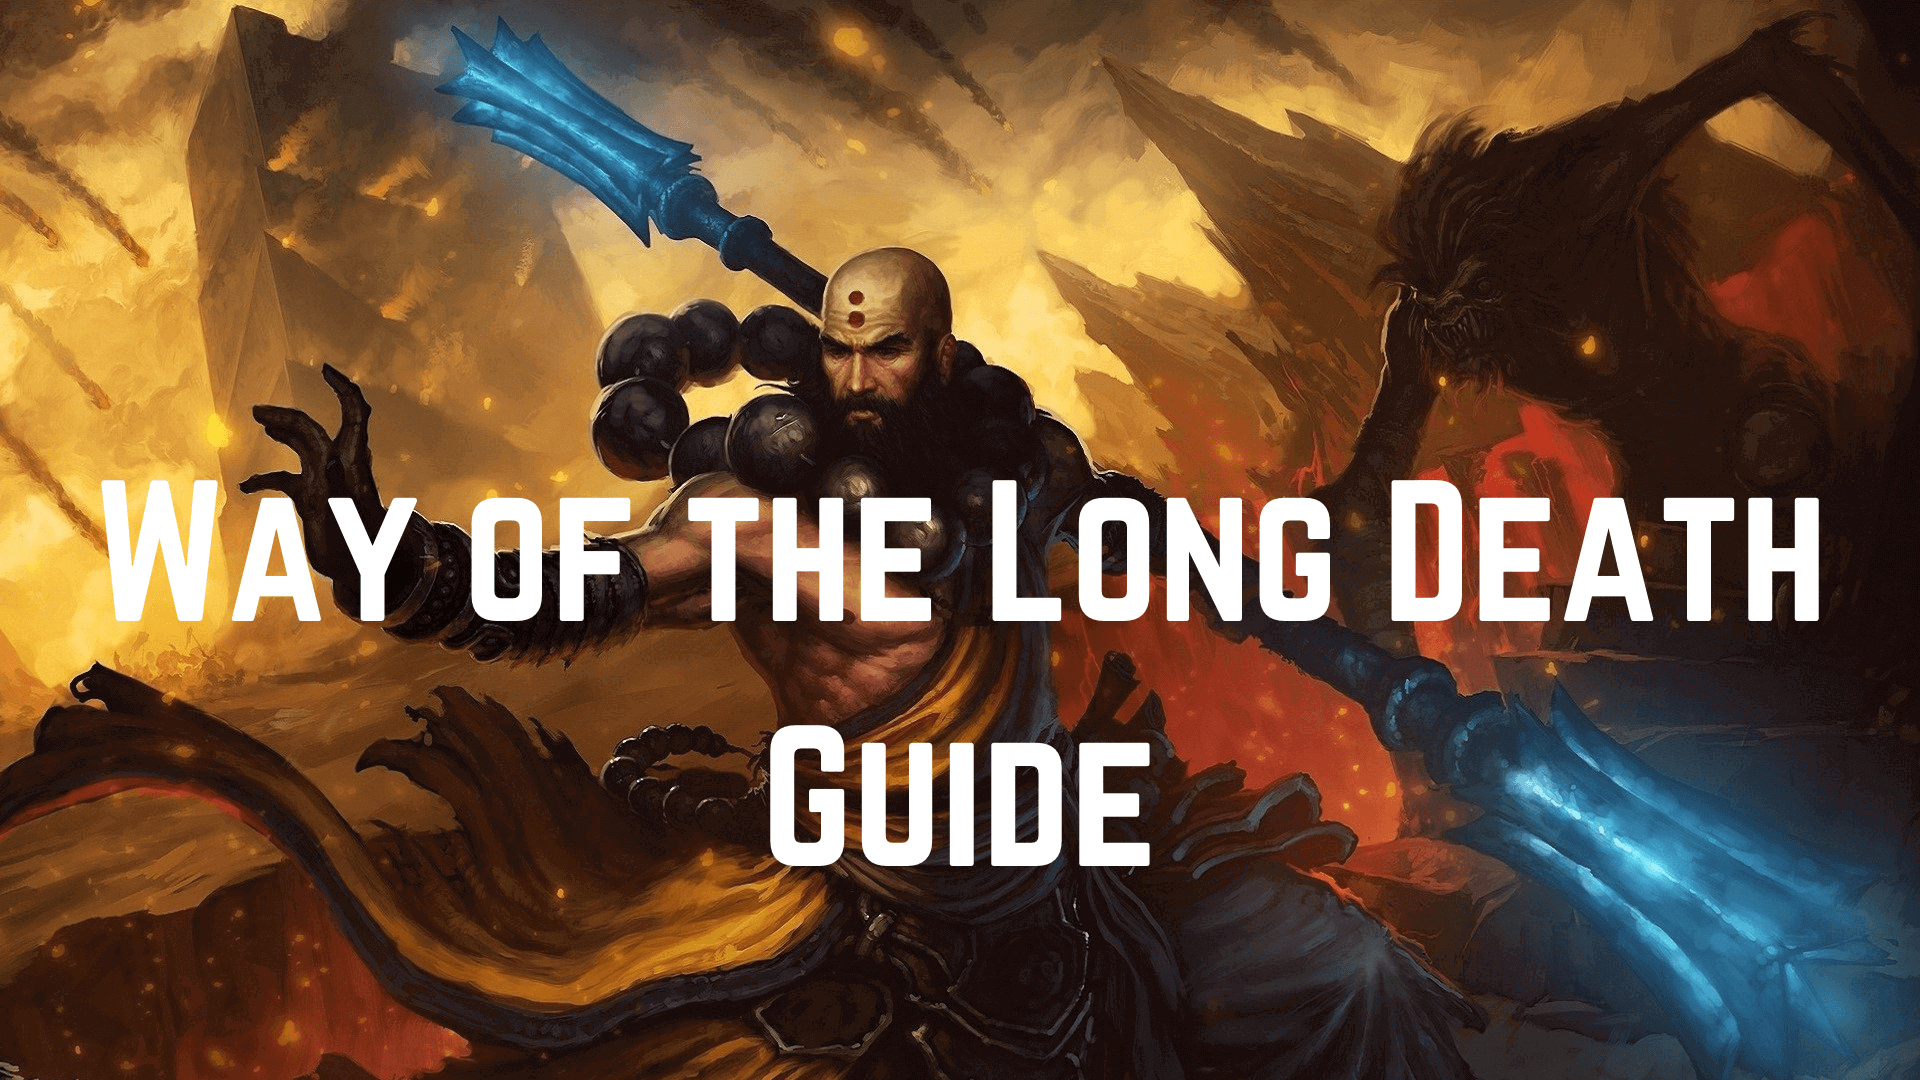 Way of the Long Death